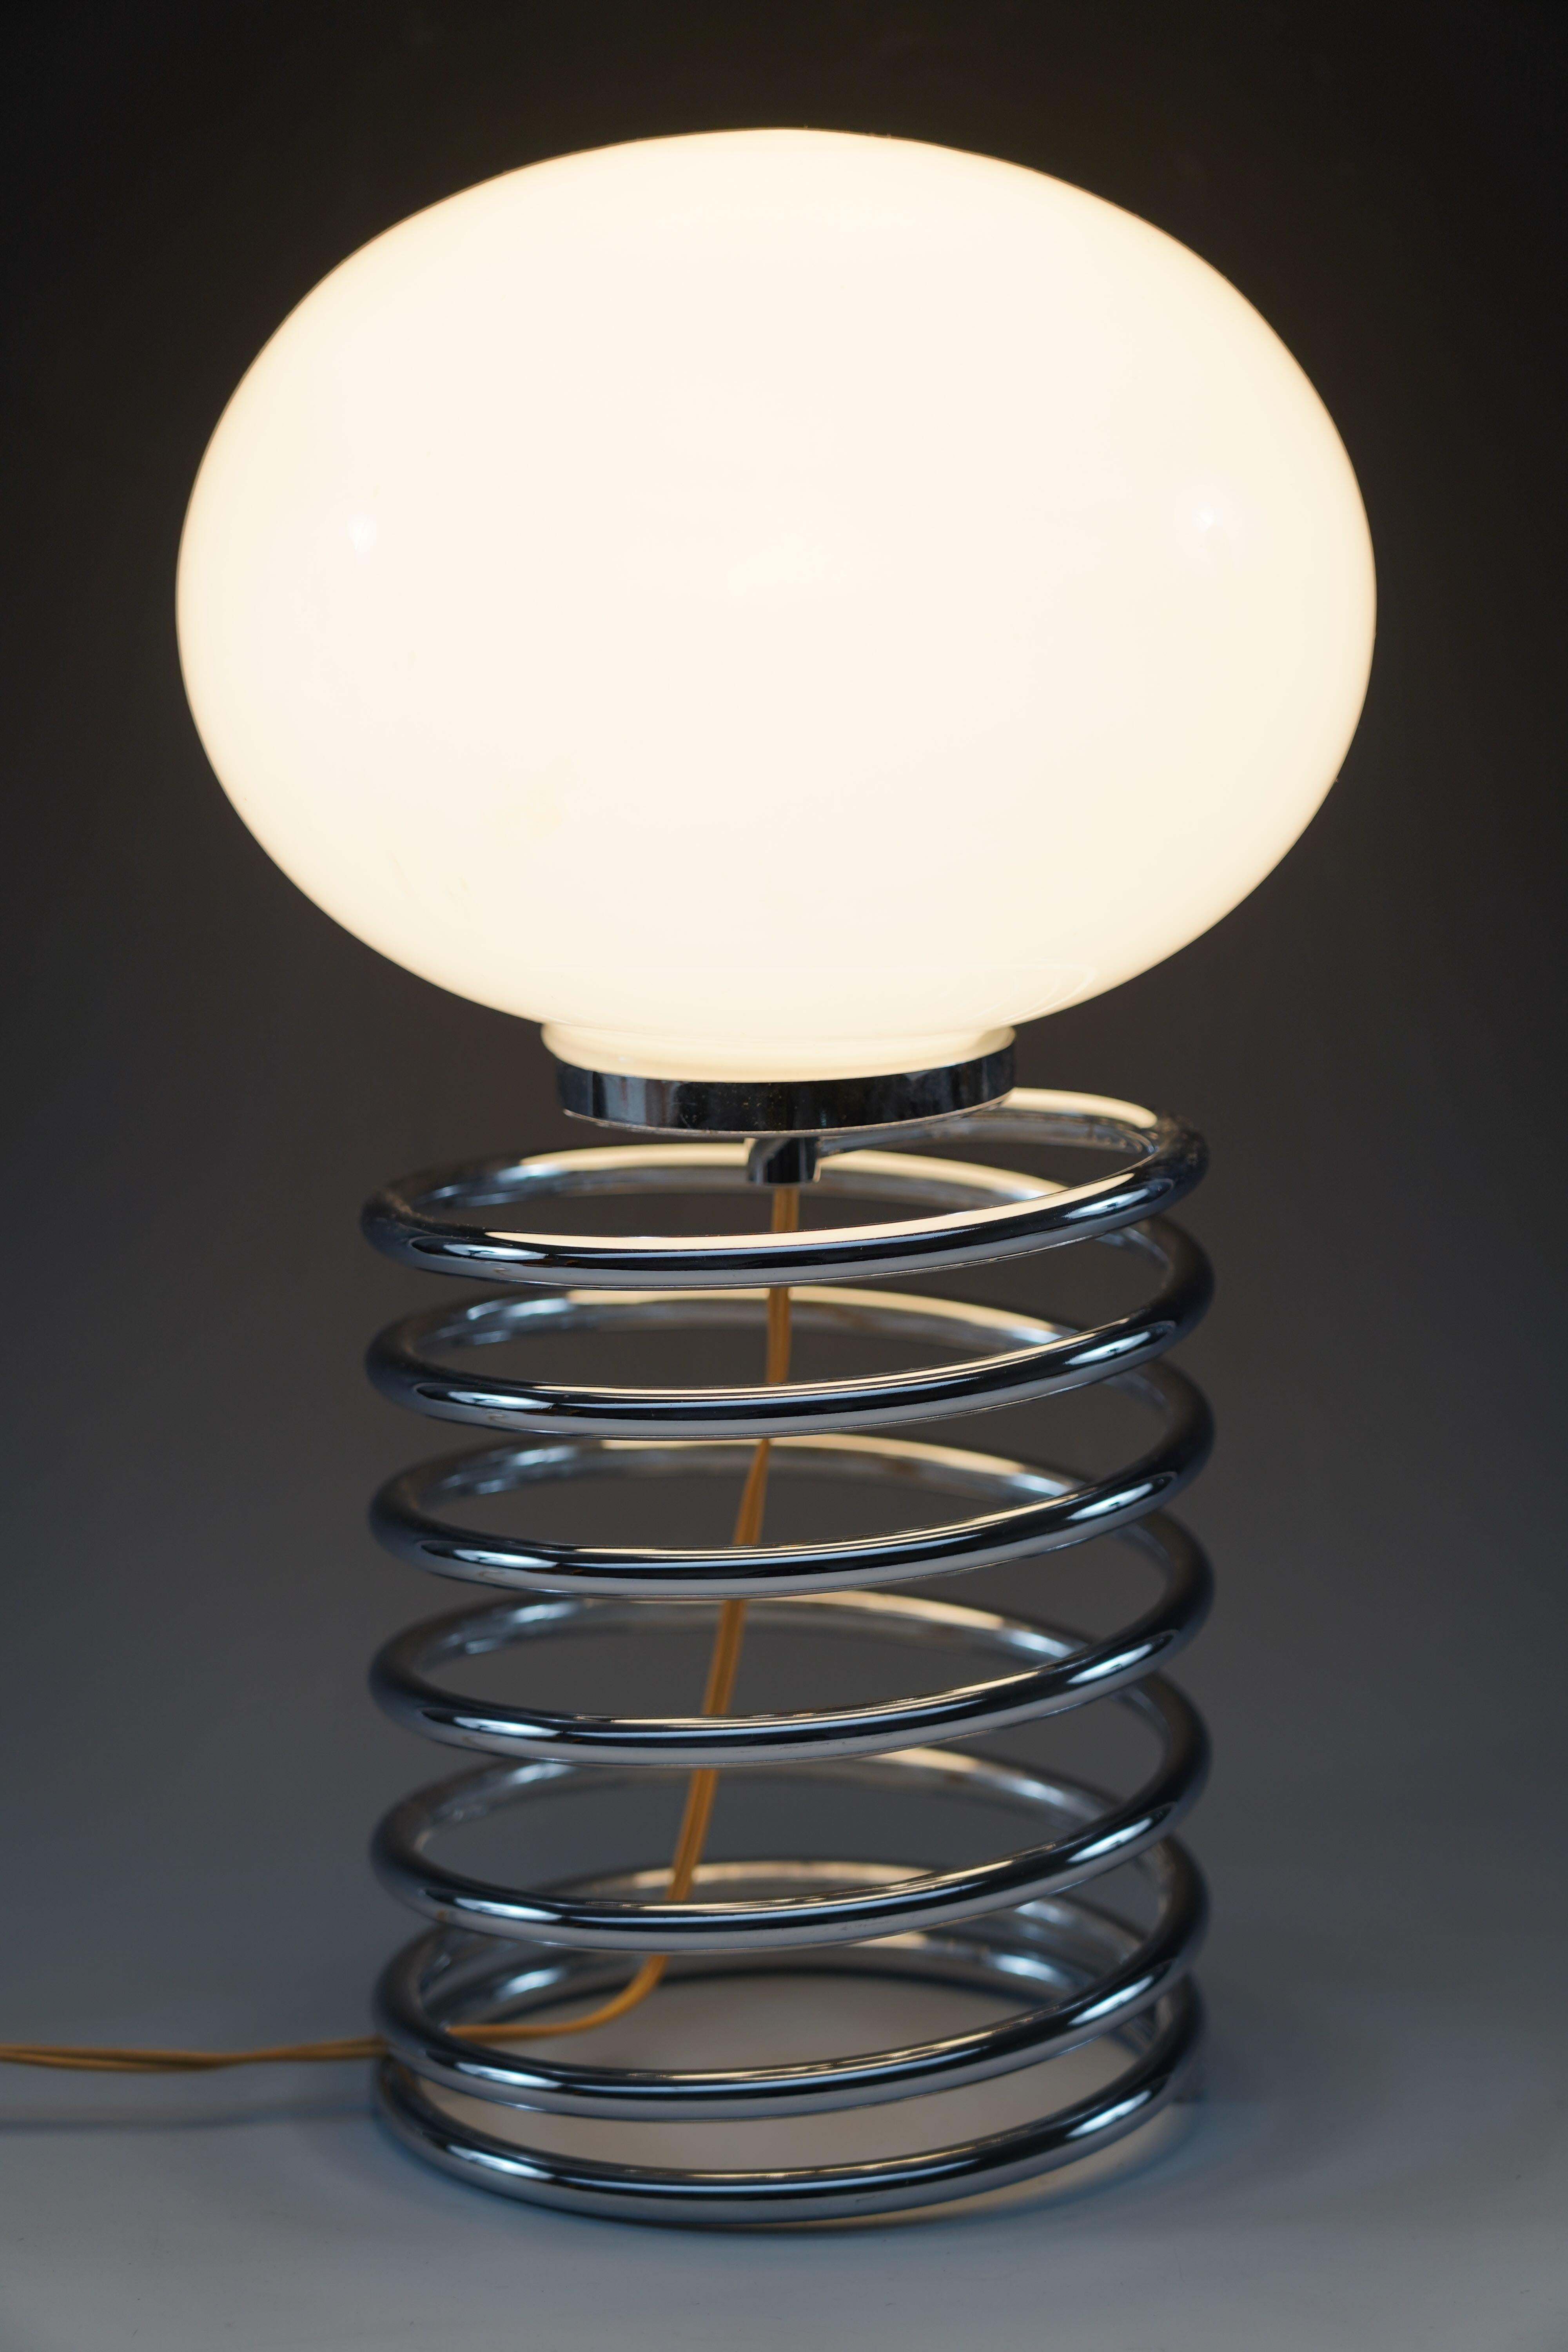 Mid-20th Century “Spiral” Lamp by Ingo Maurer for Design M, Germany, circa 1966 For Sale